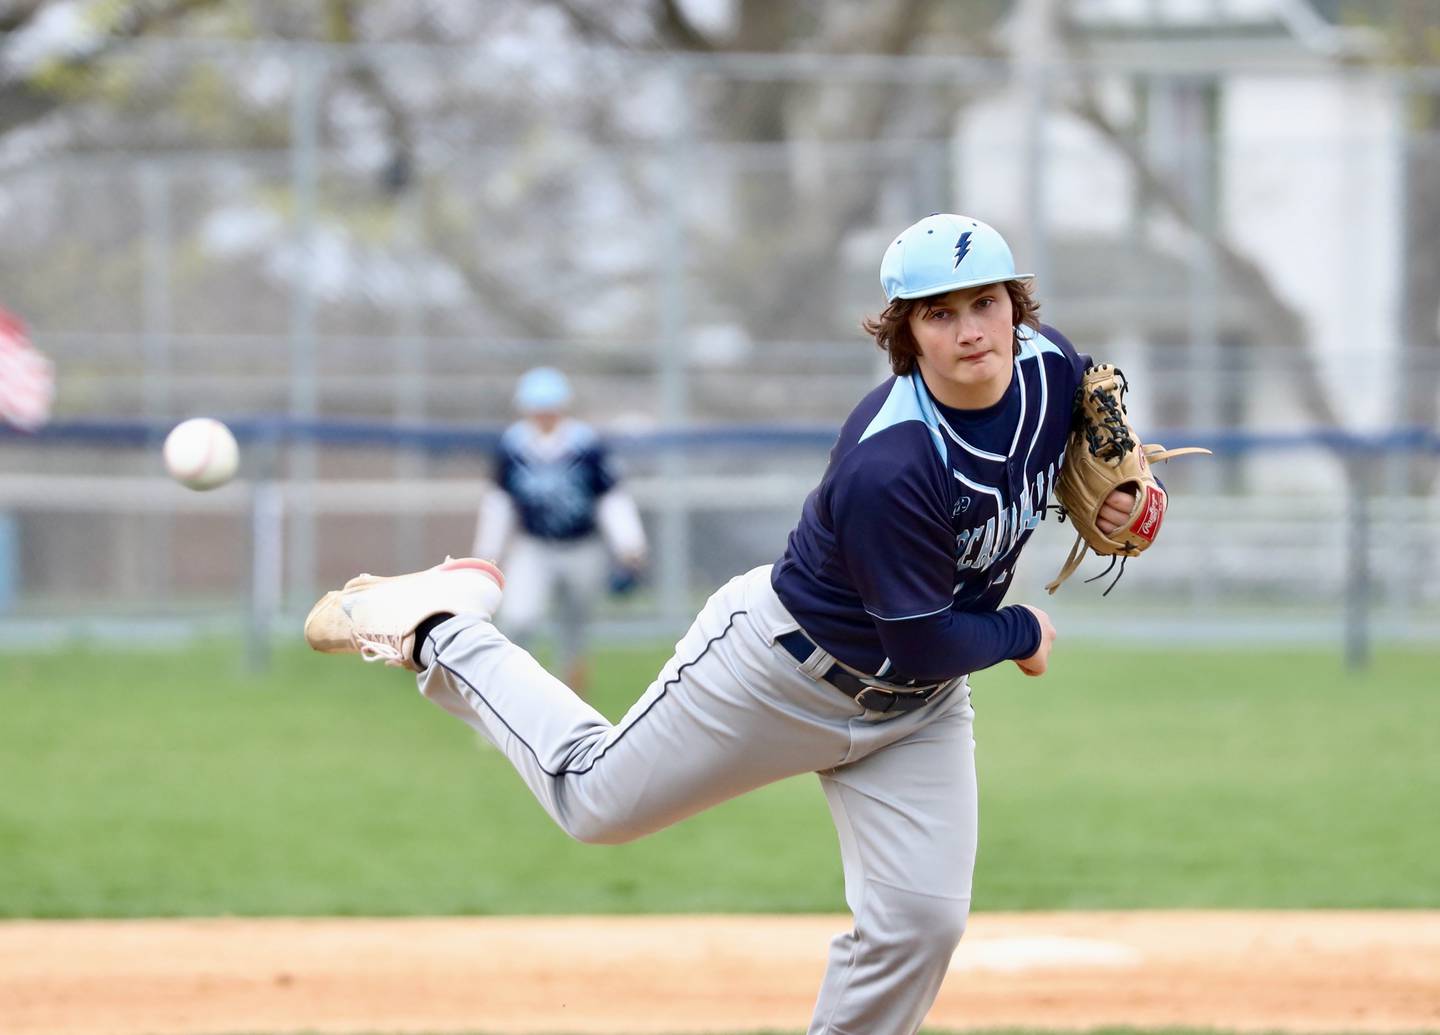 Sam Rouse delivers a pitch for Bureau Valley Monday at Princeton. He struck out nine batters in a 13-3 win over the rival Tigers.